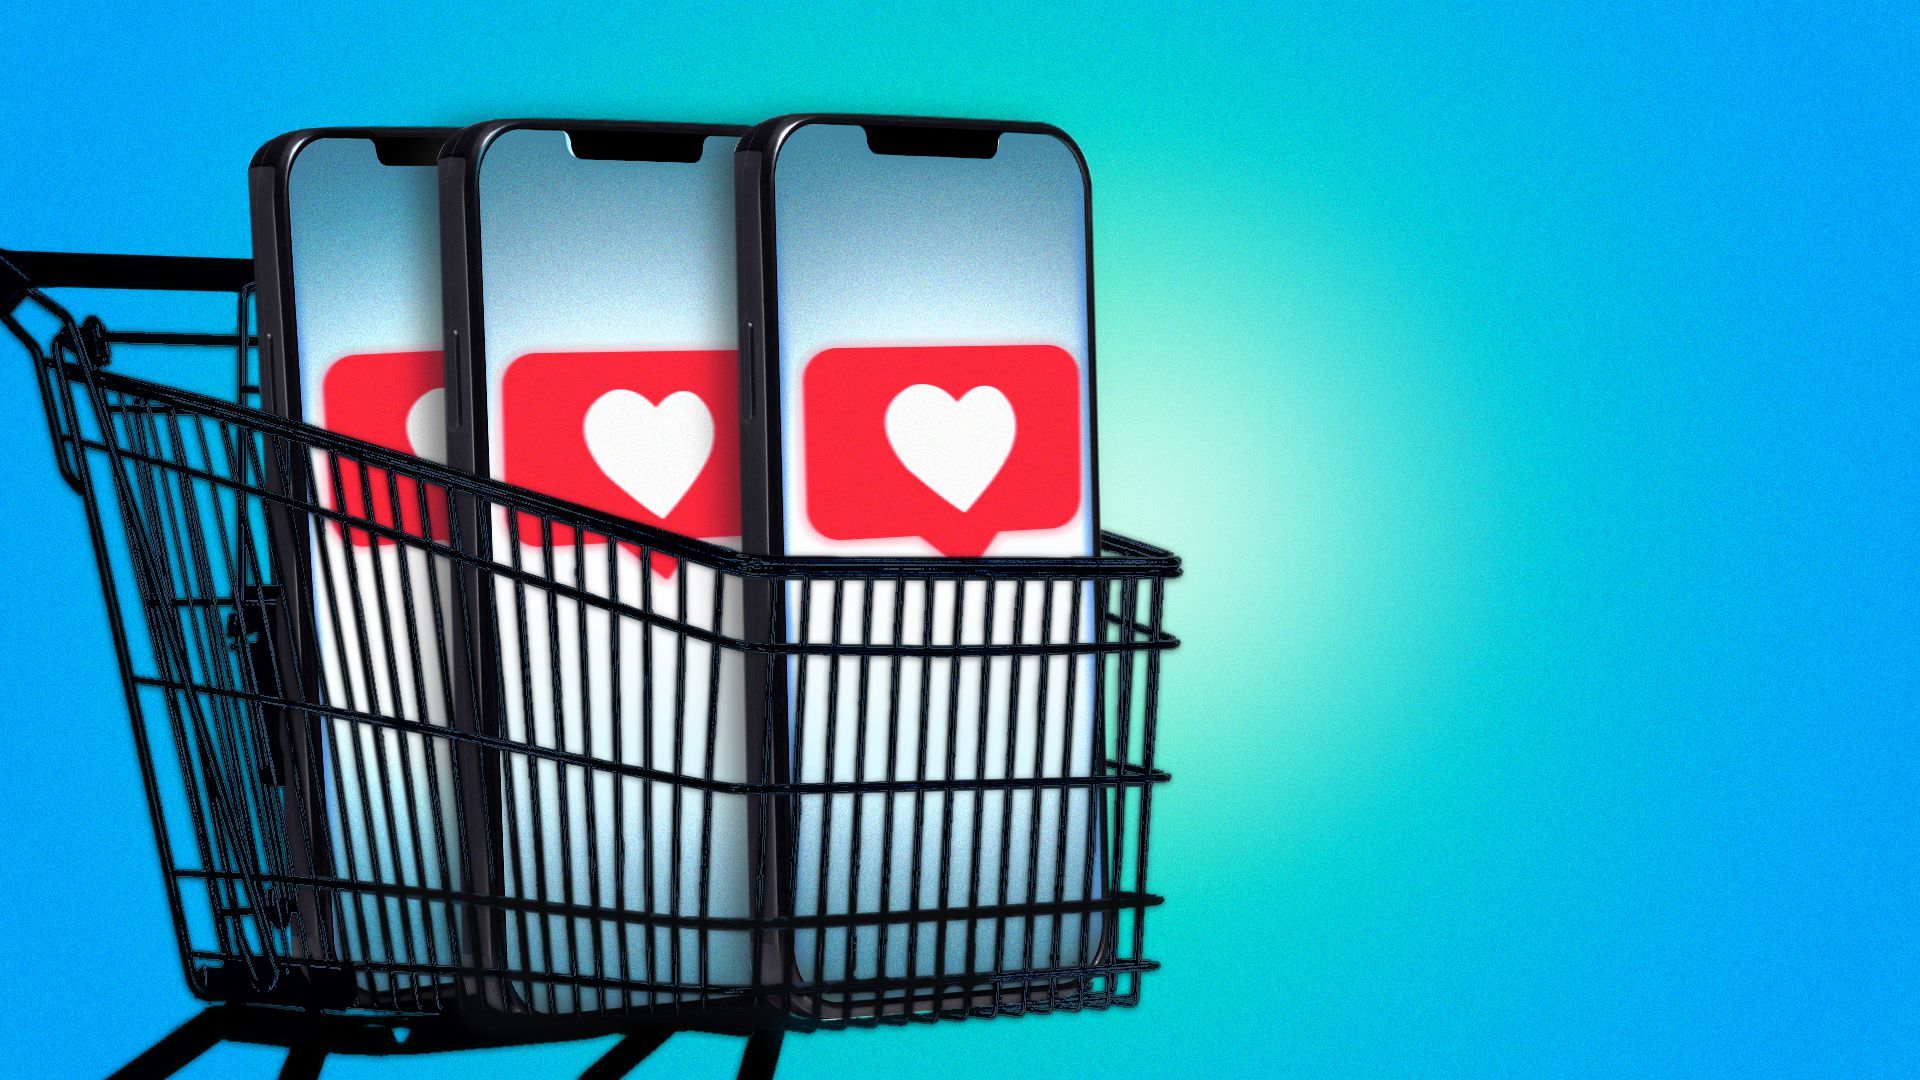 Illustration of three cellphones, each with a "like" icon, in a shopping cart.